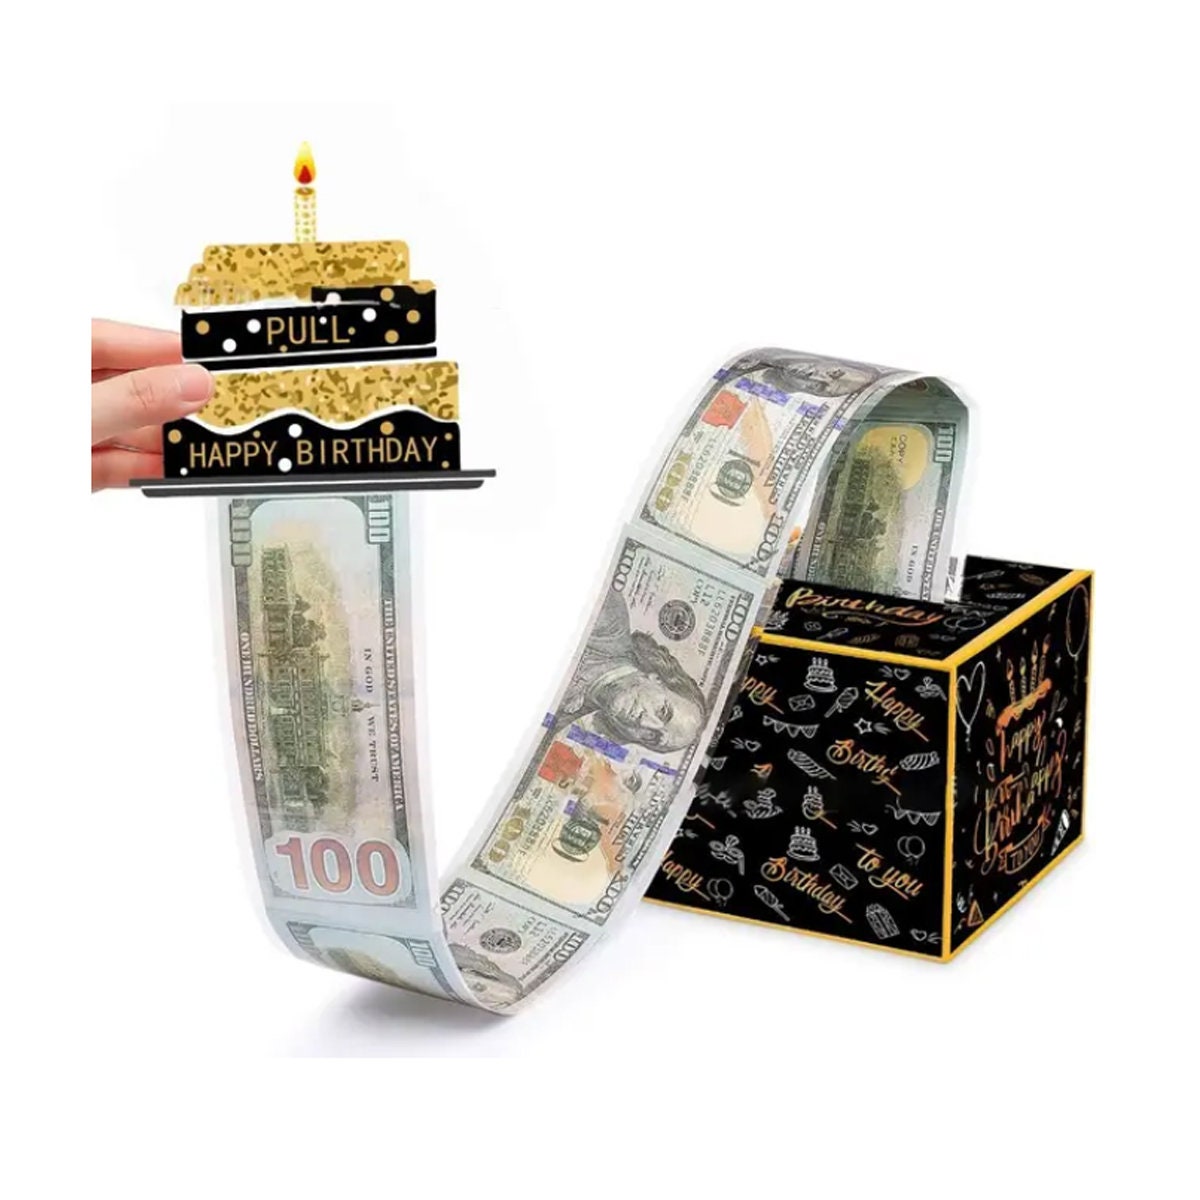 Merry Christmas Surprise Gift Box Explosion for Money, Christmas